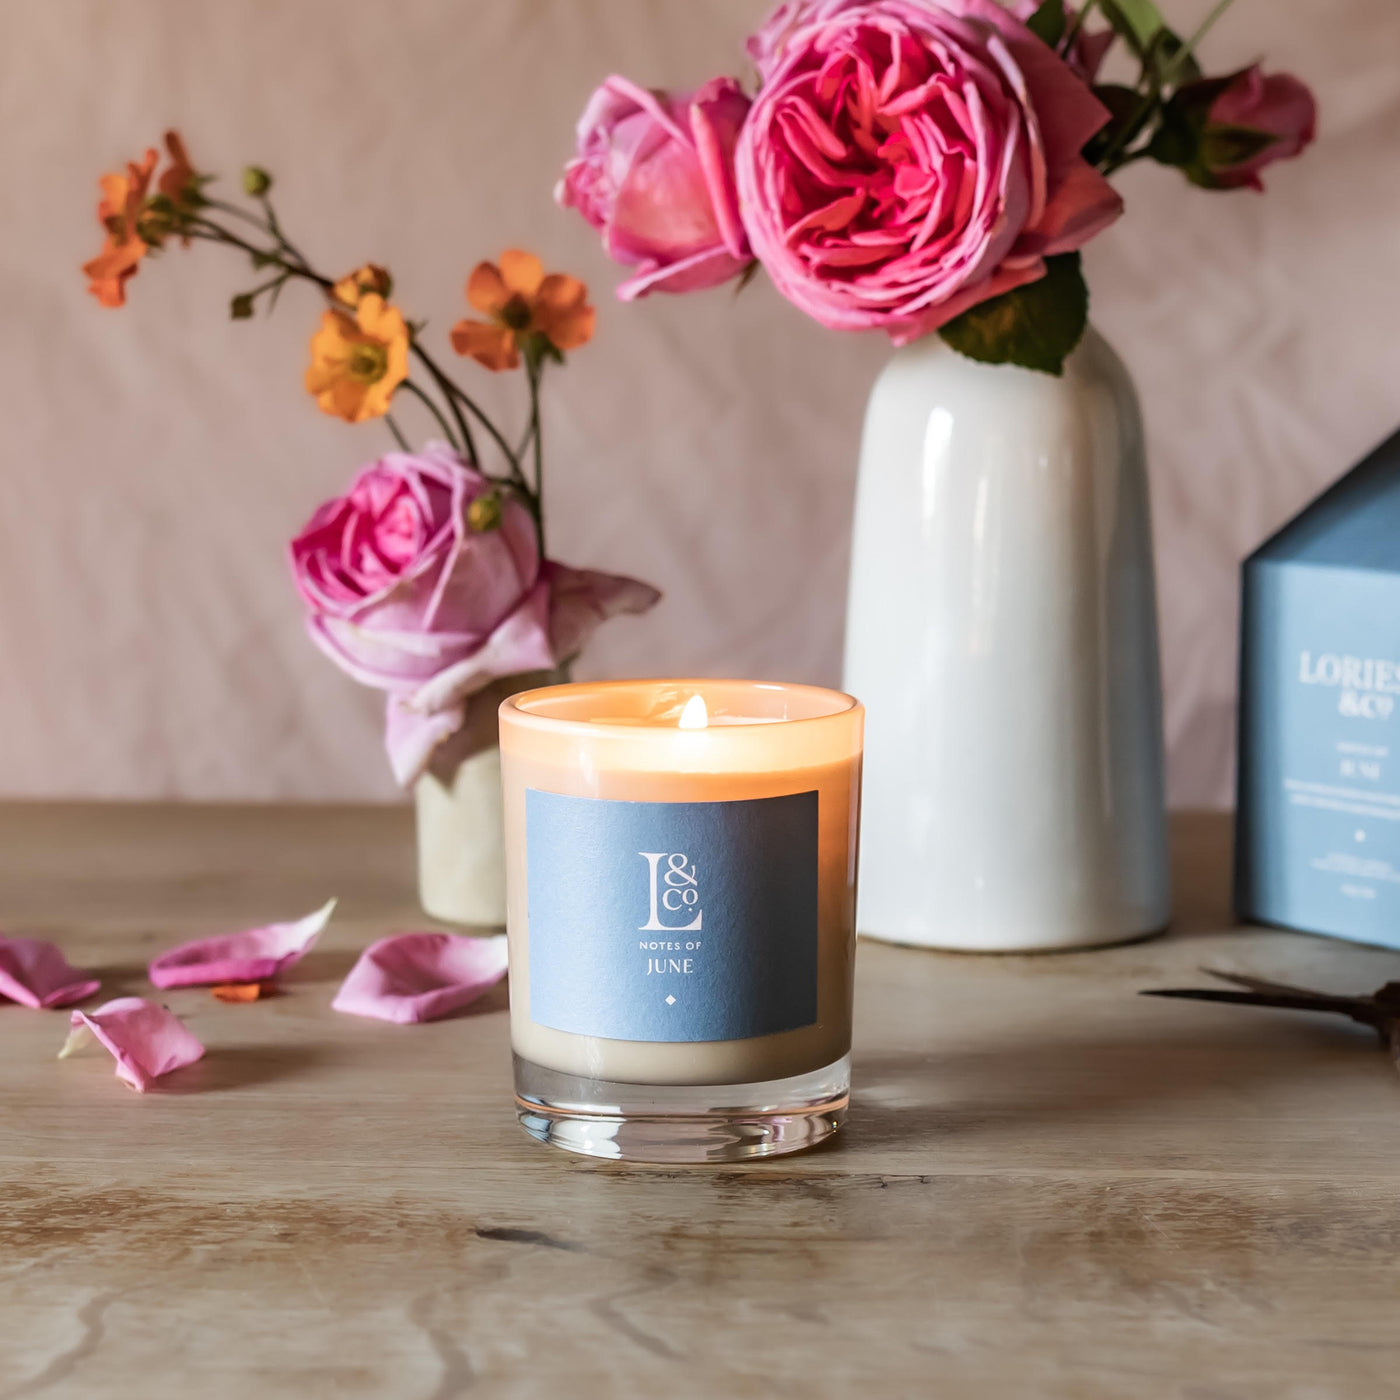 The beautiful scent of rose, elderflower and freshly cut grass. A delightful home fragrance, Notes of June candle is hand-poured in England using sustainable plant-based wax.  Scent you special occasion with Loriest.